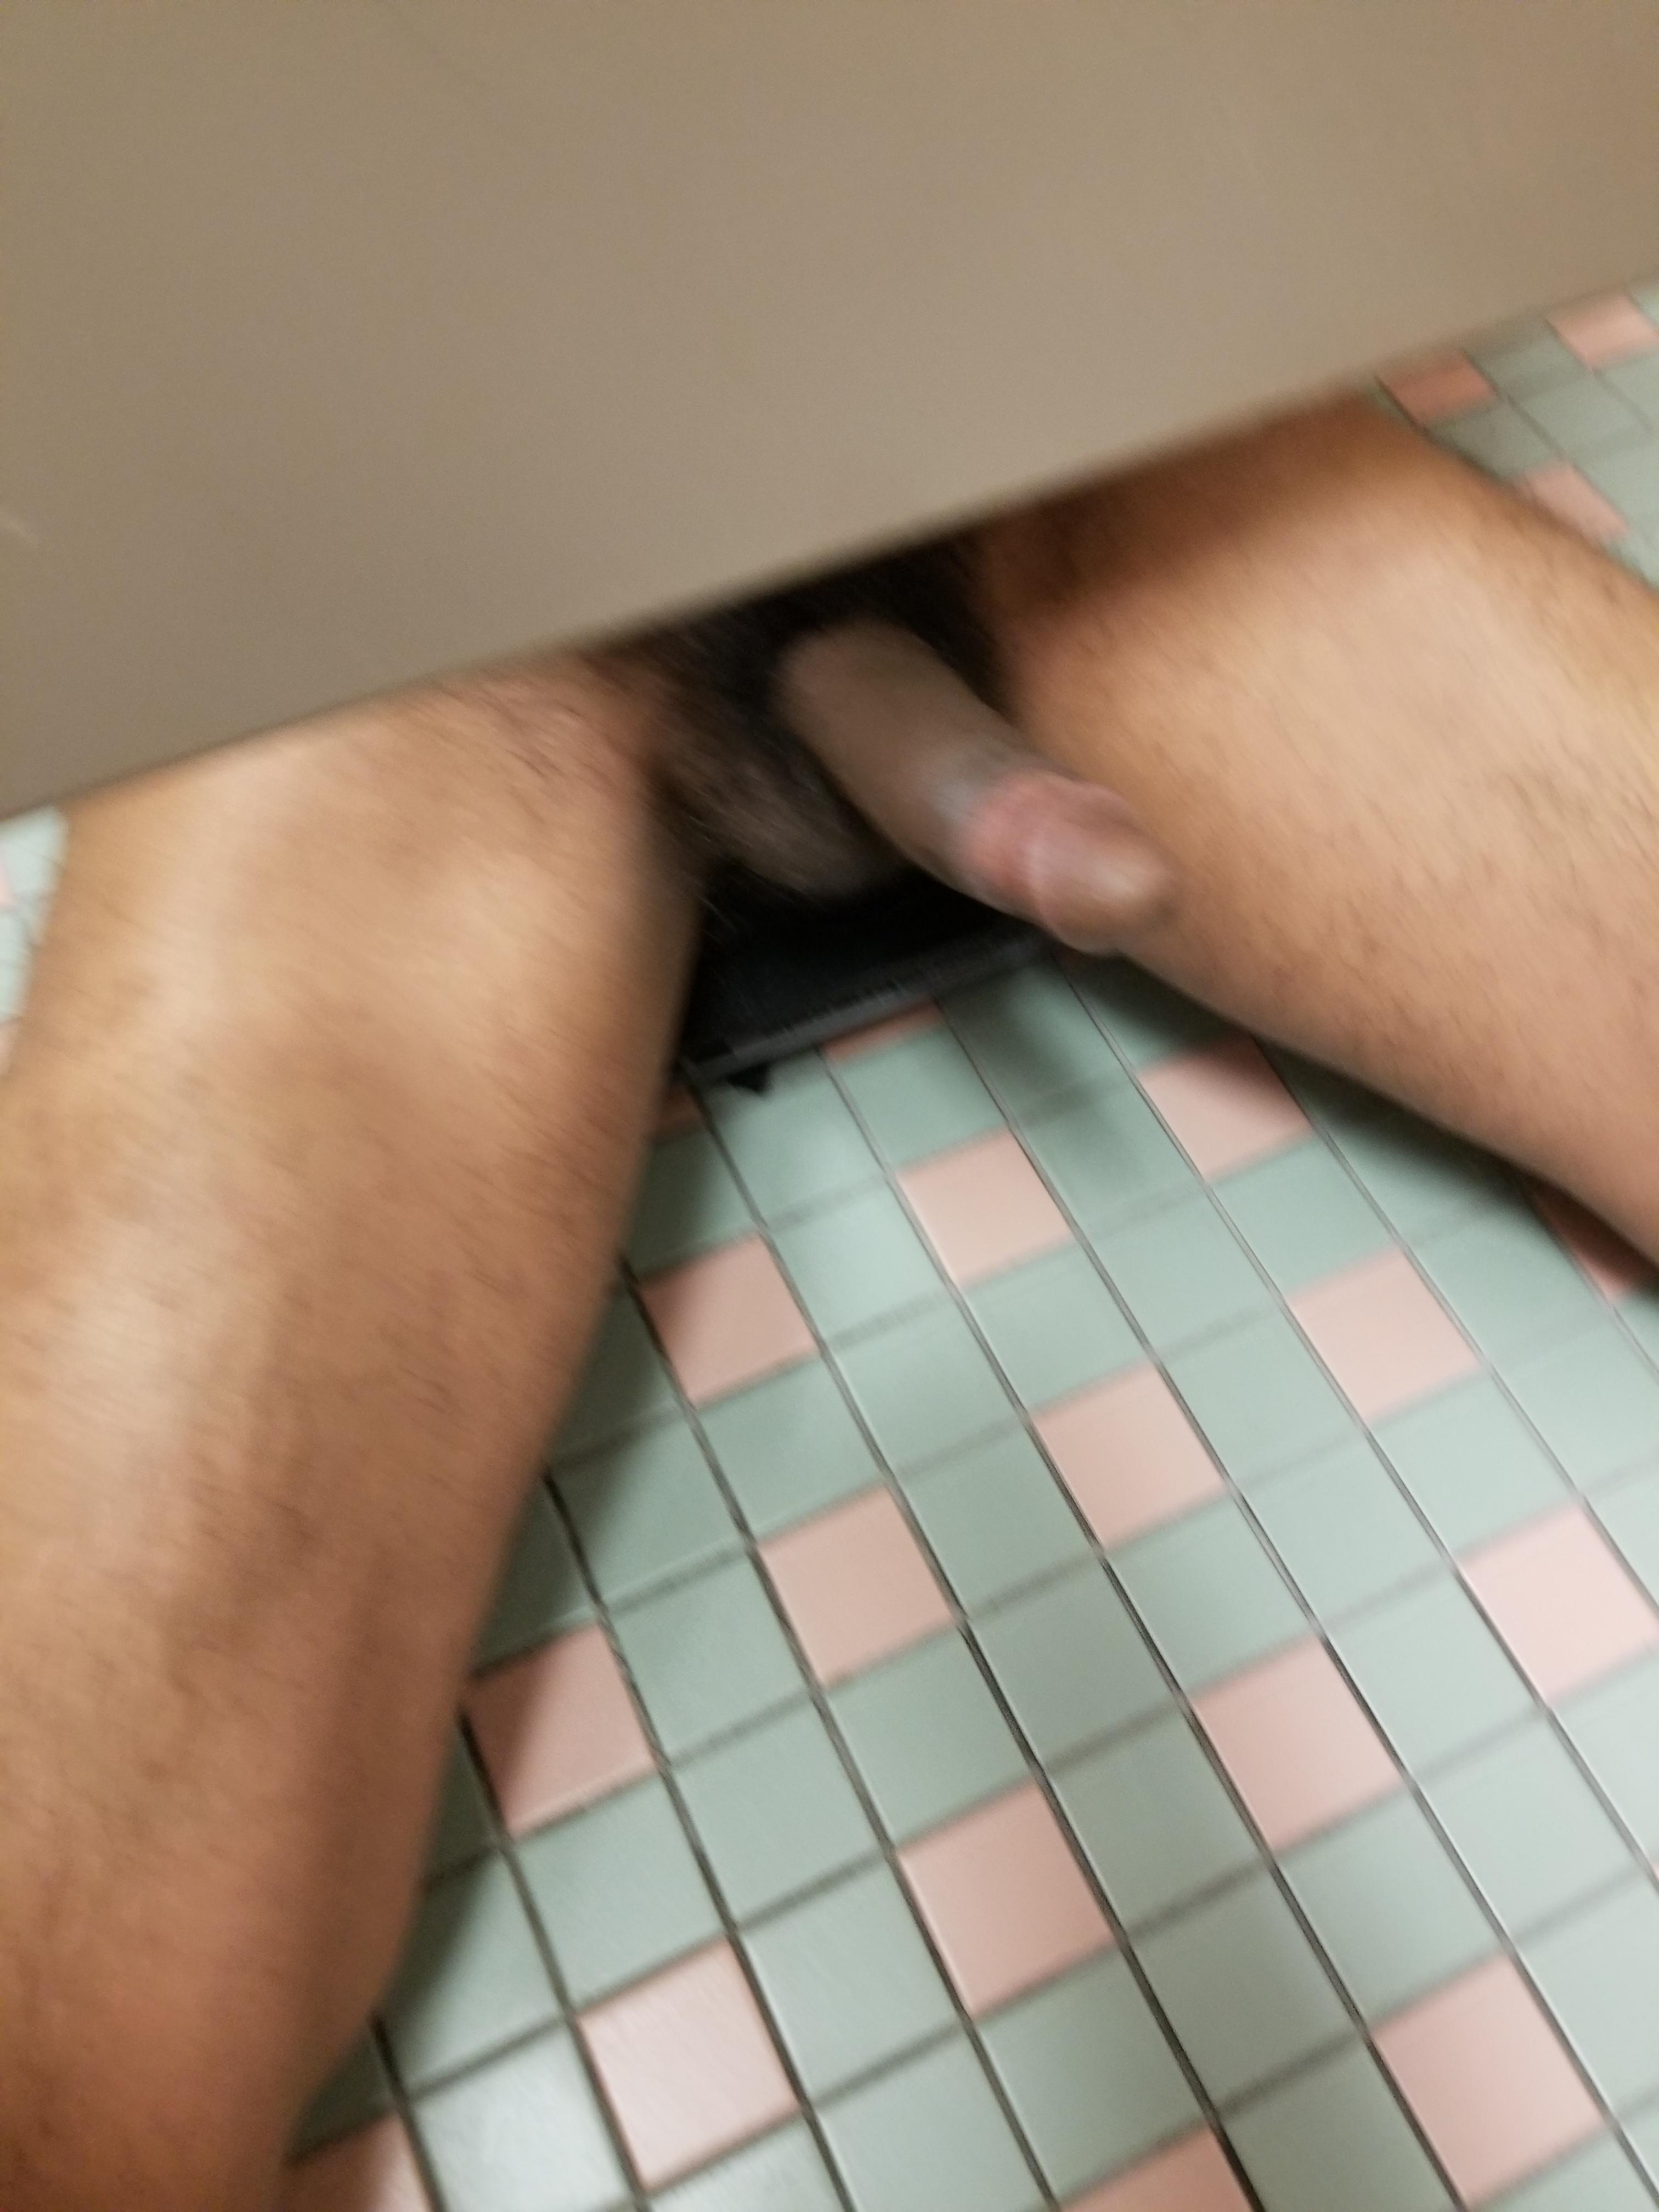 Blurry cock pic